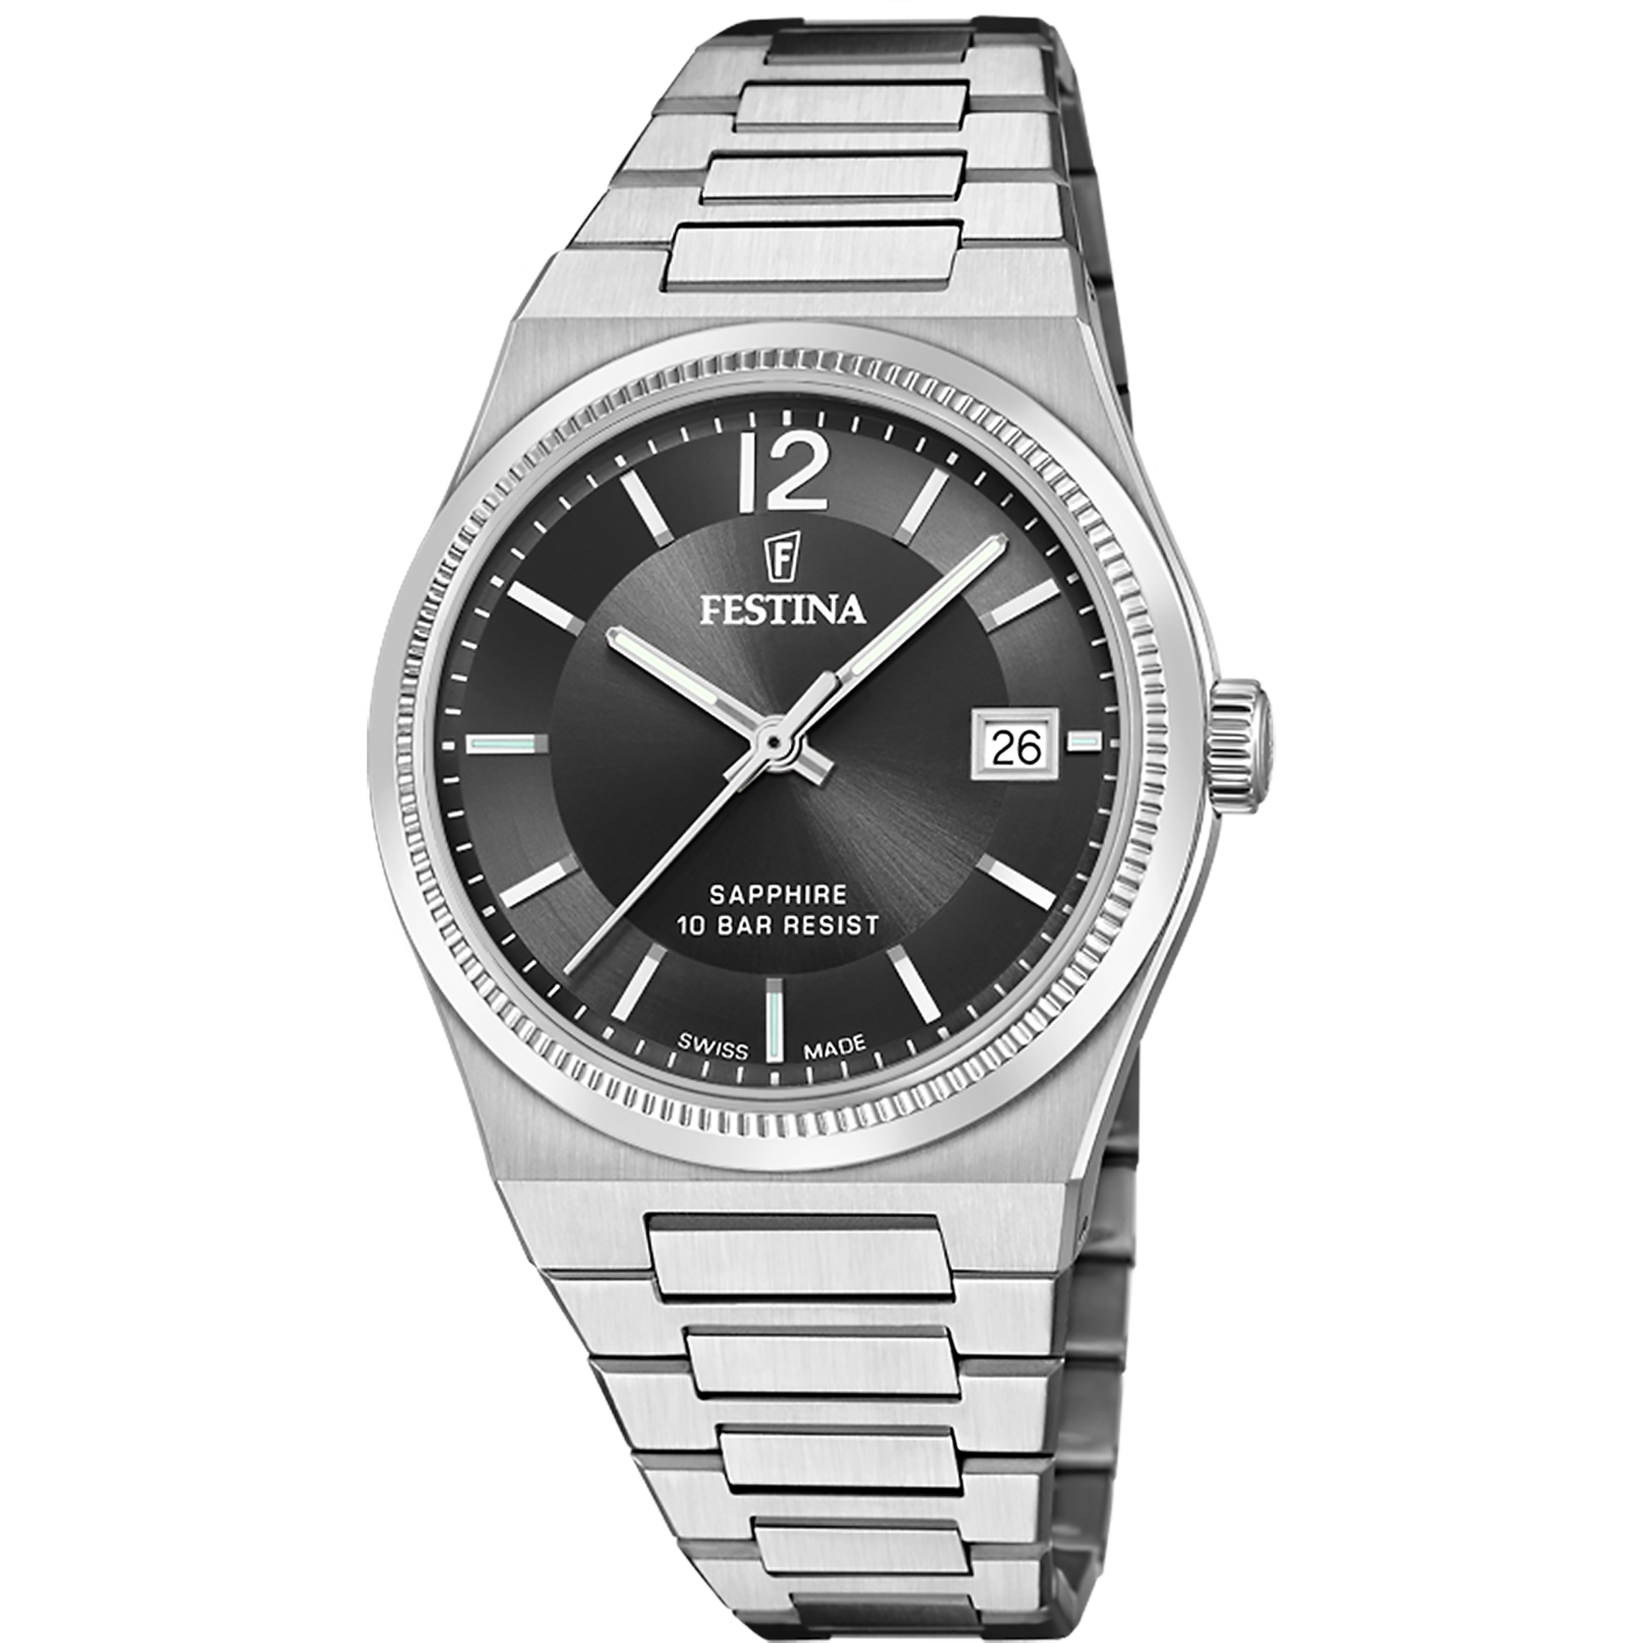 Festina Swiss Made F20035-6 - Analog - Strap Material Stainless Steel I Festina Watches USA